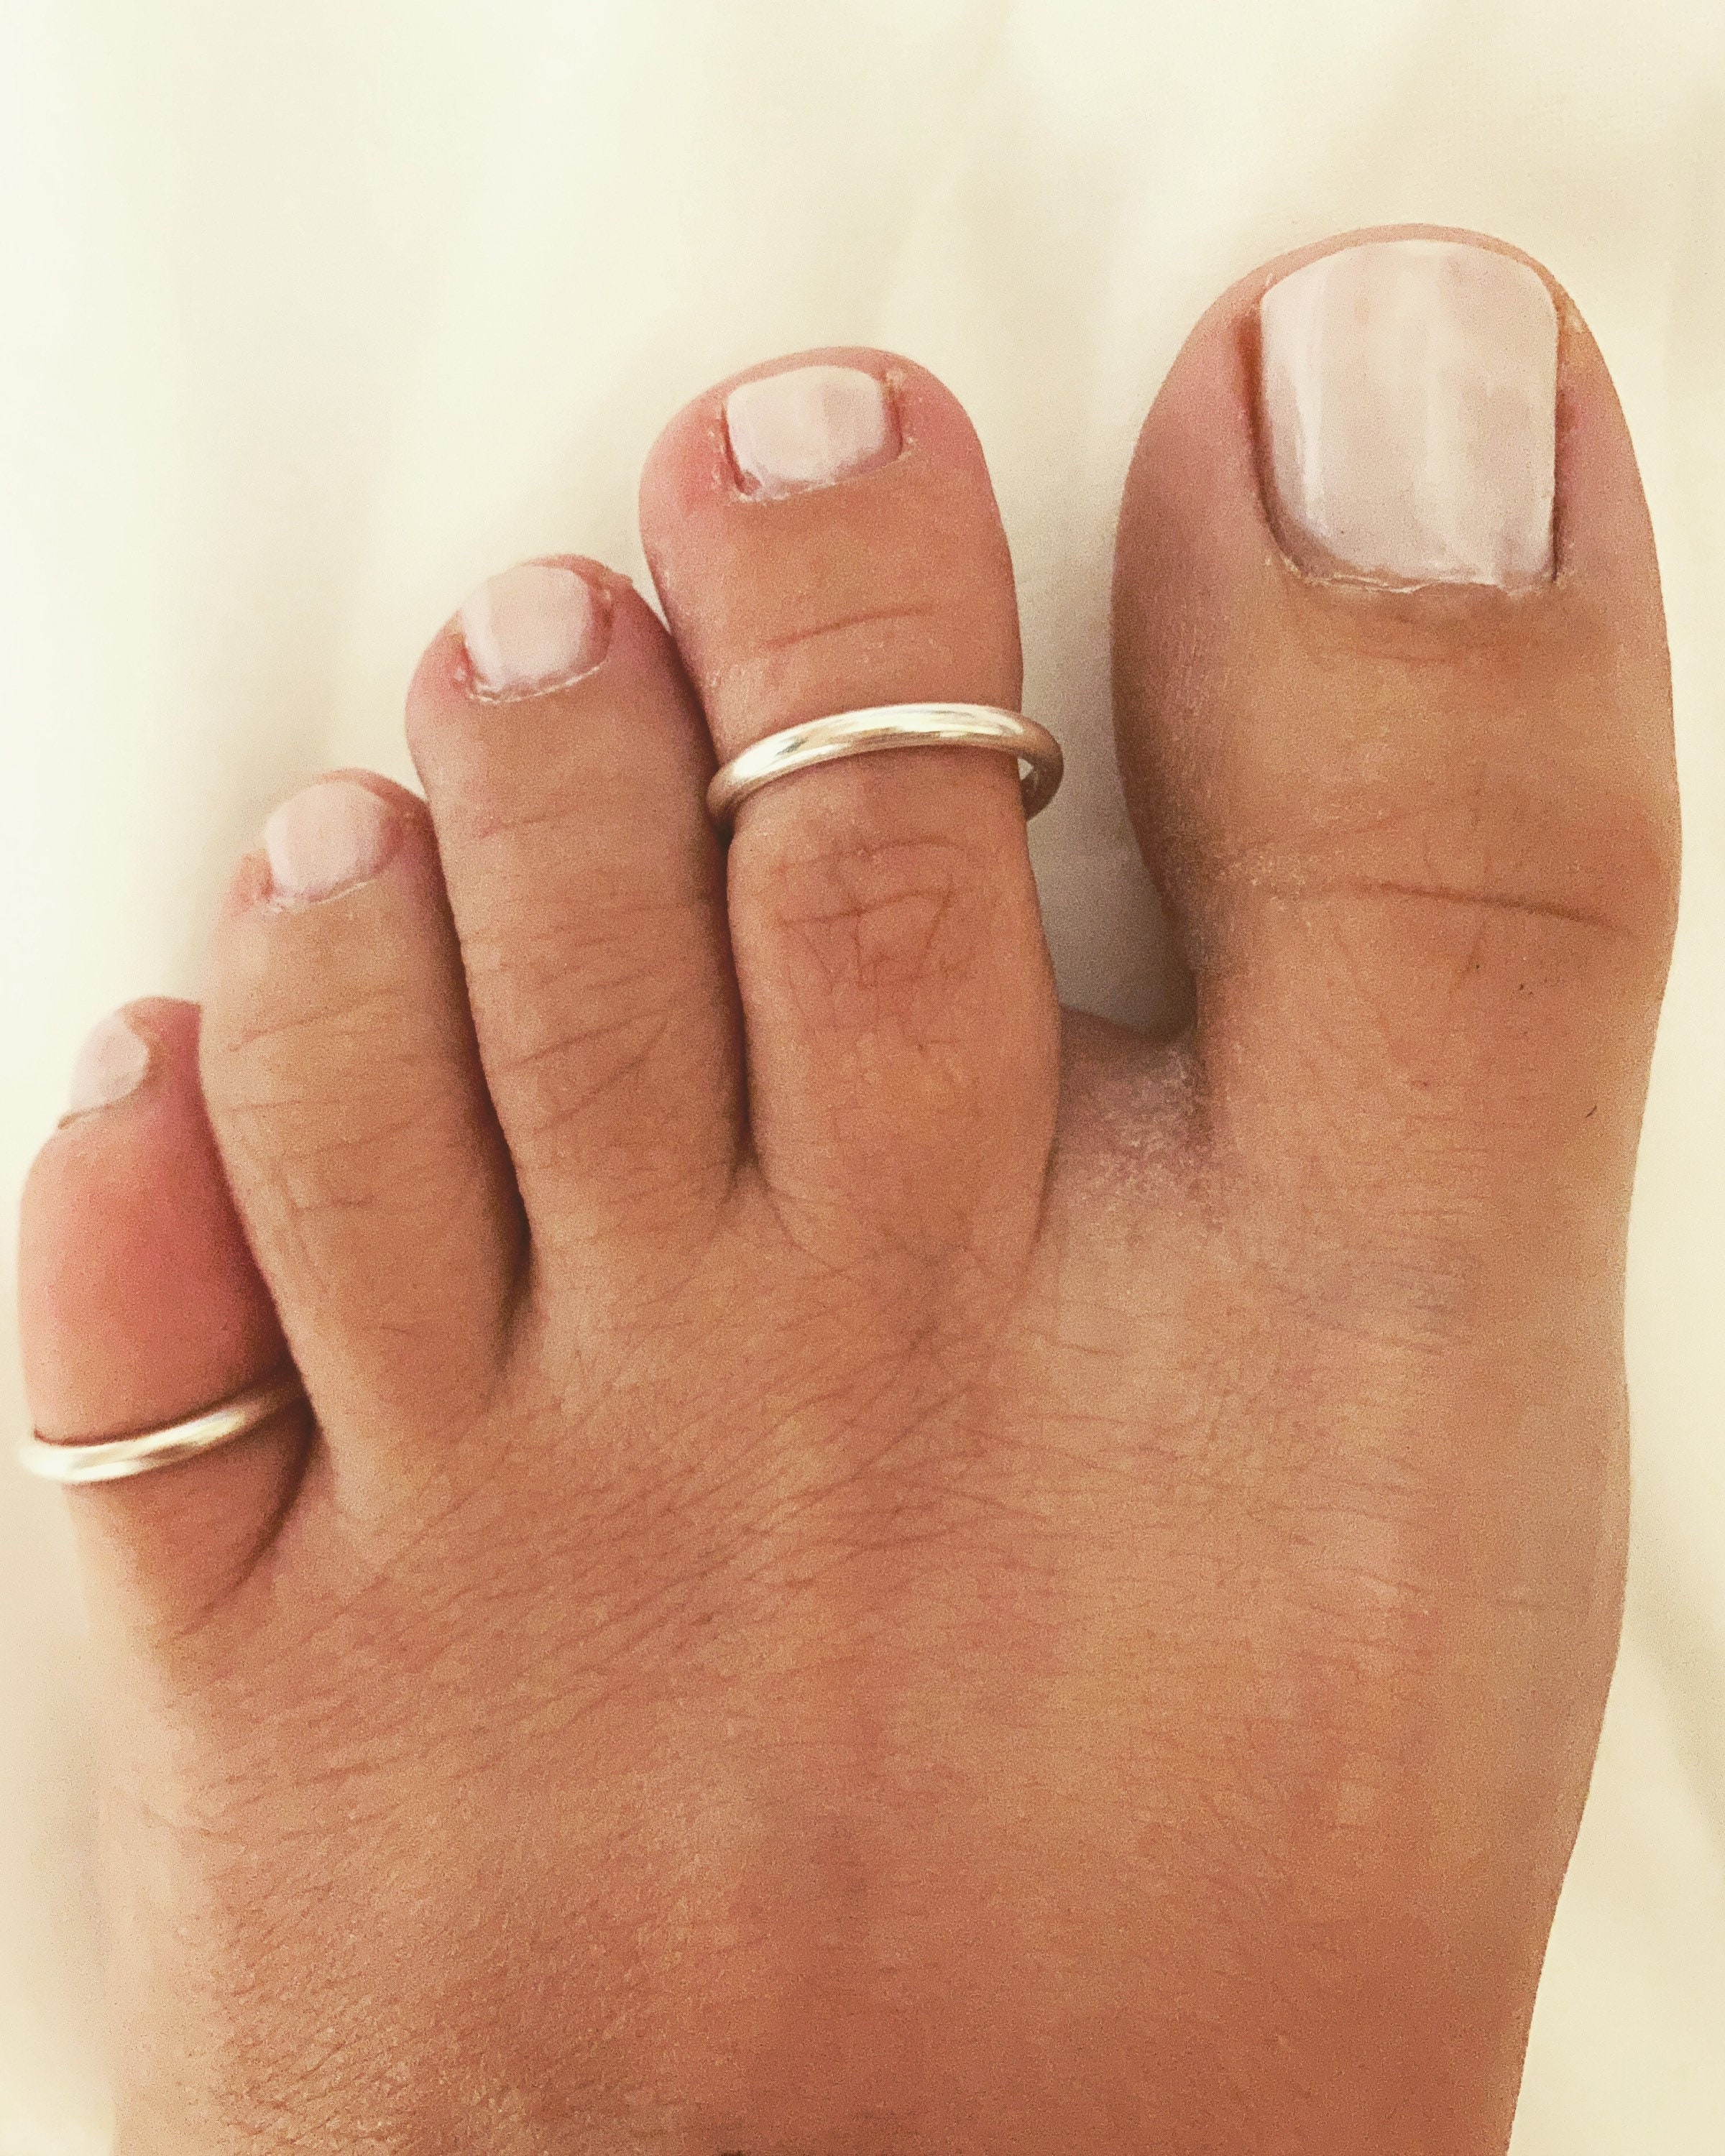 When do you take toe rings off? - Quora